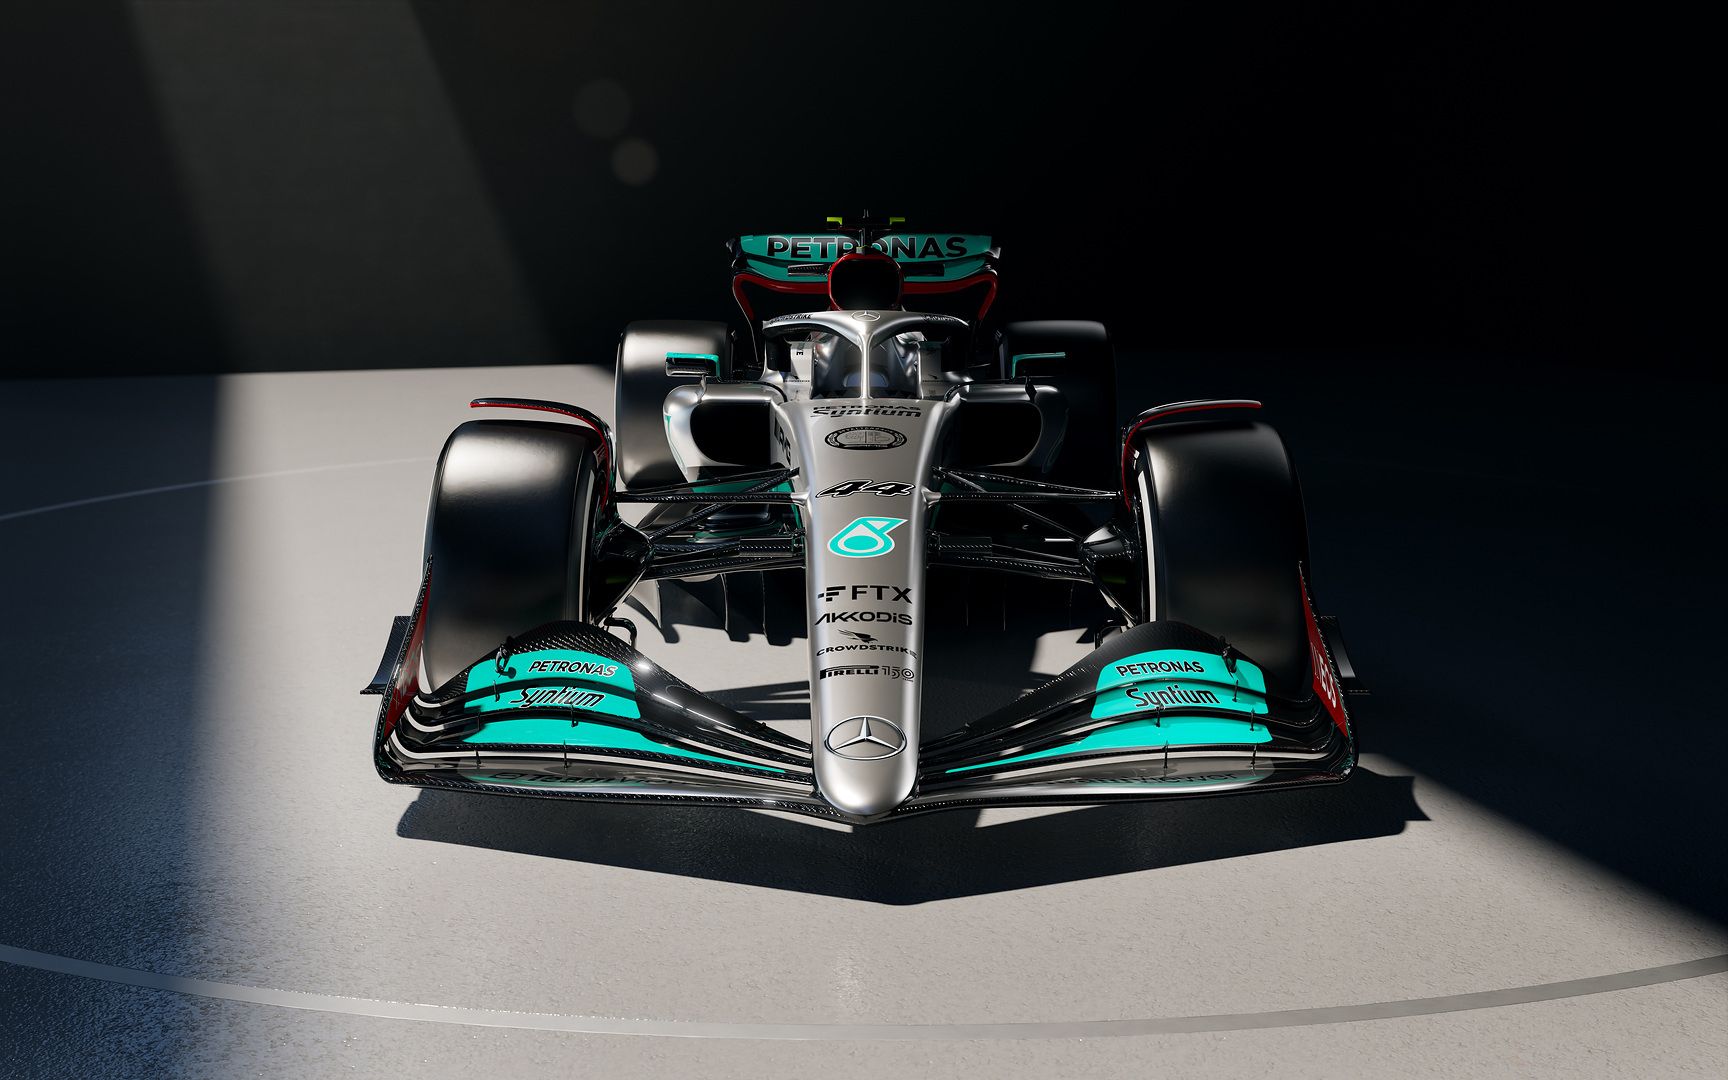 First Image Of Mercedes F1 W13 Team Says Car Is New For